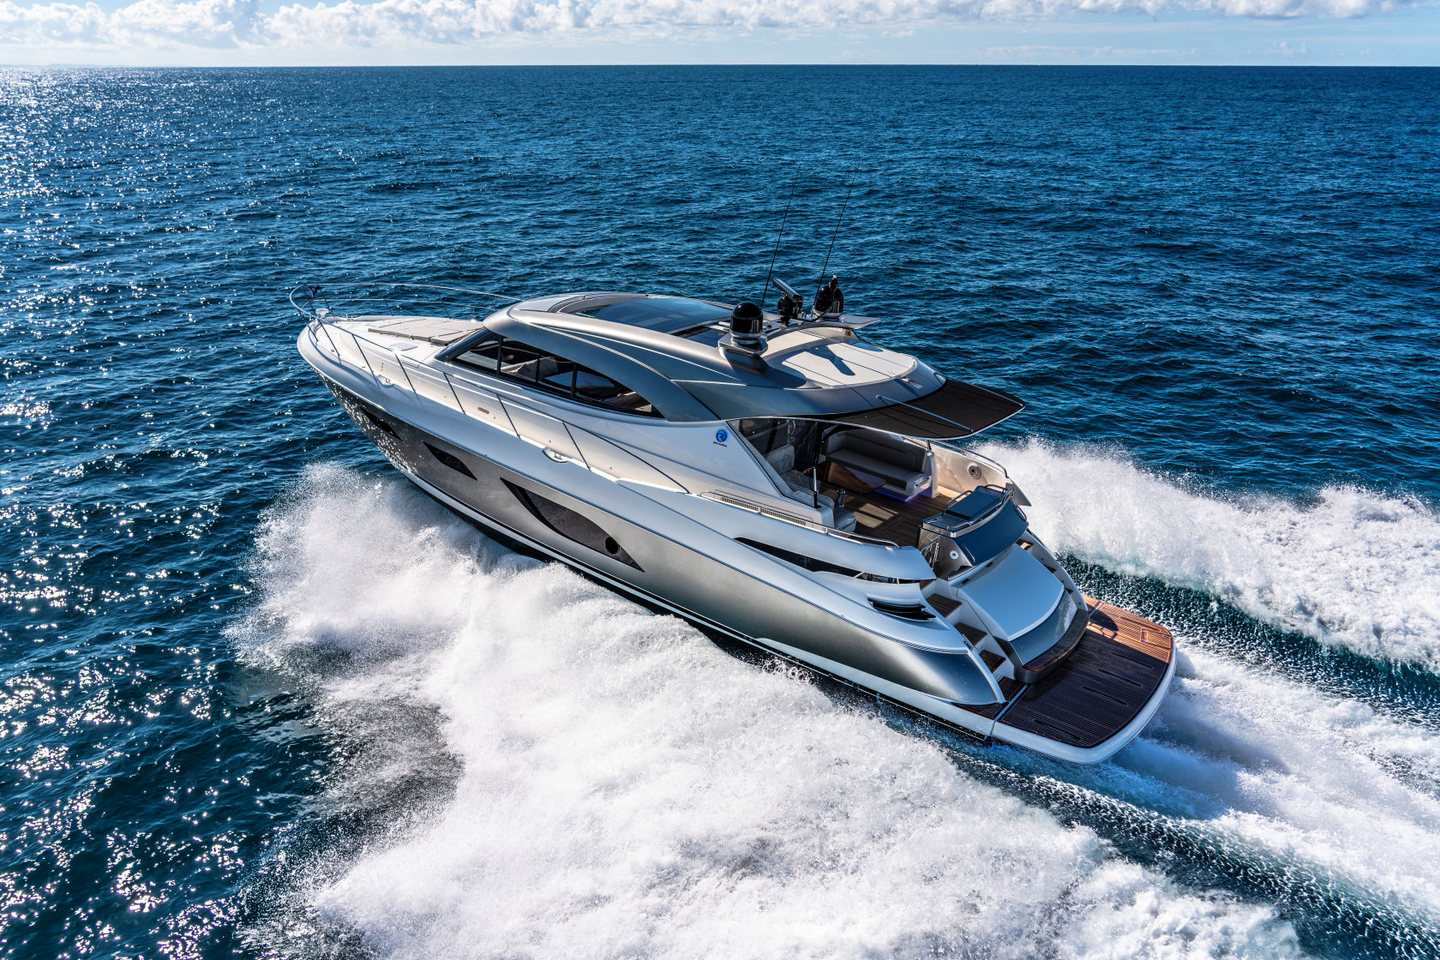 360 VR Virtual Tours of the Riviera 6000 Sport Yacht